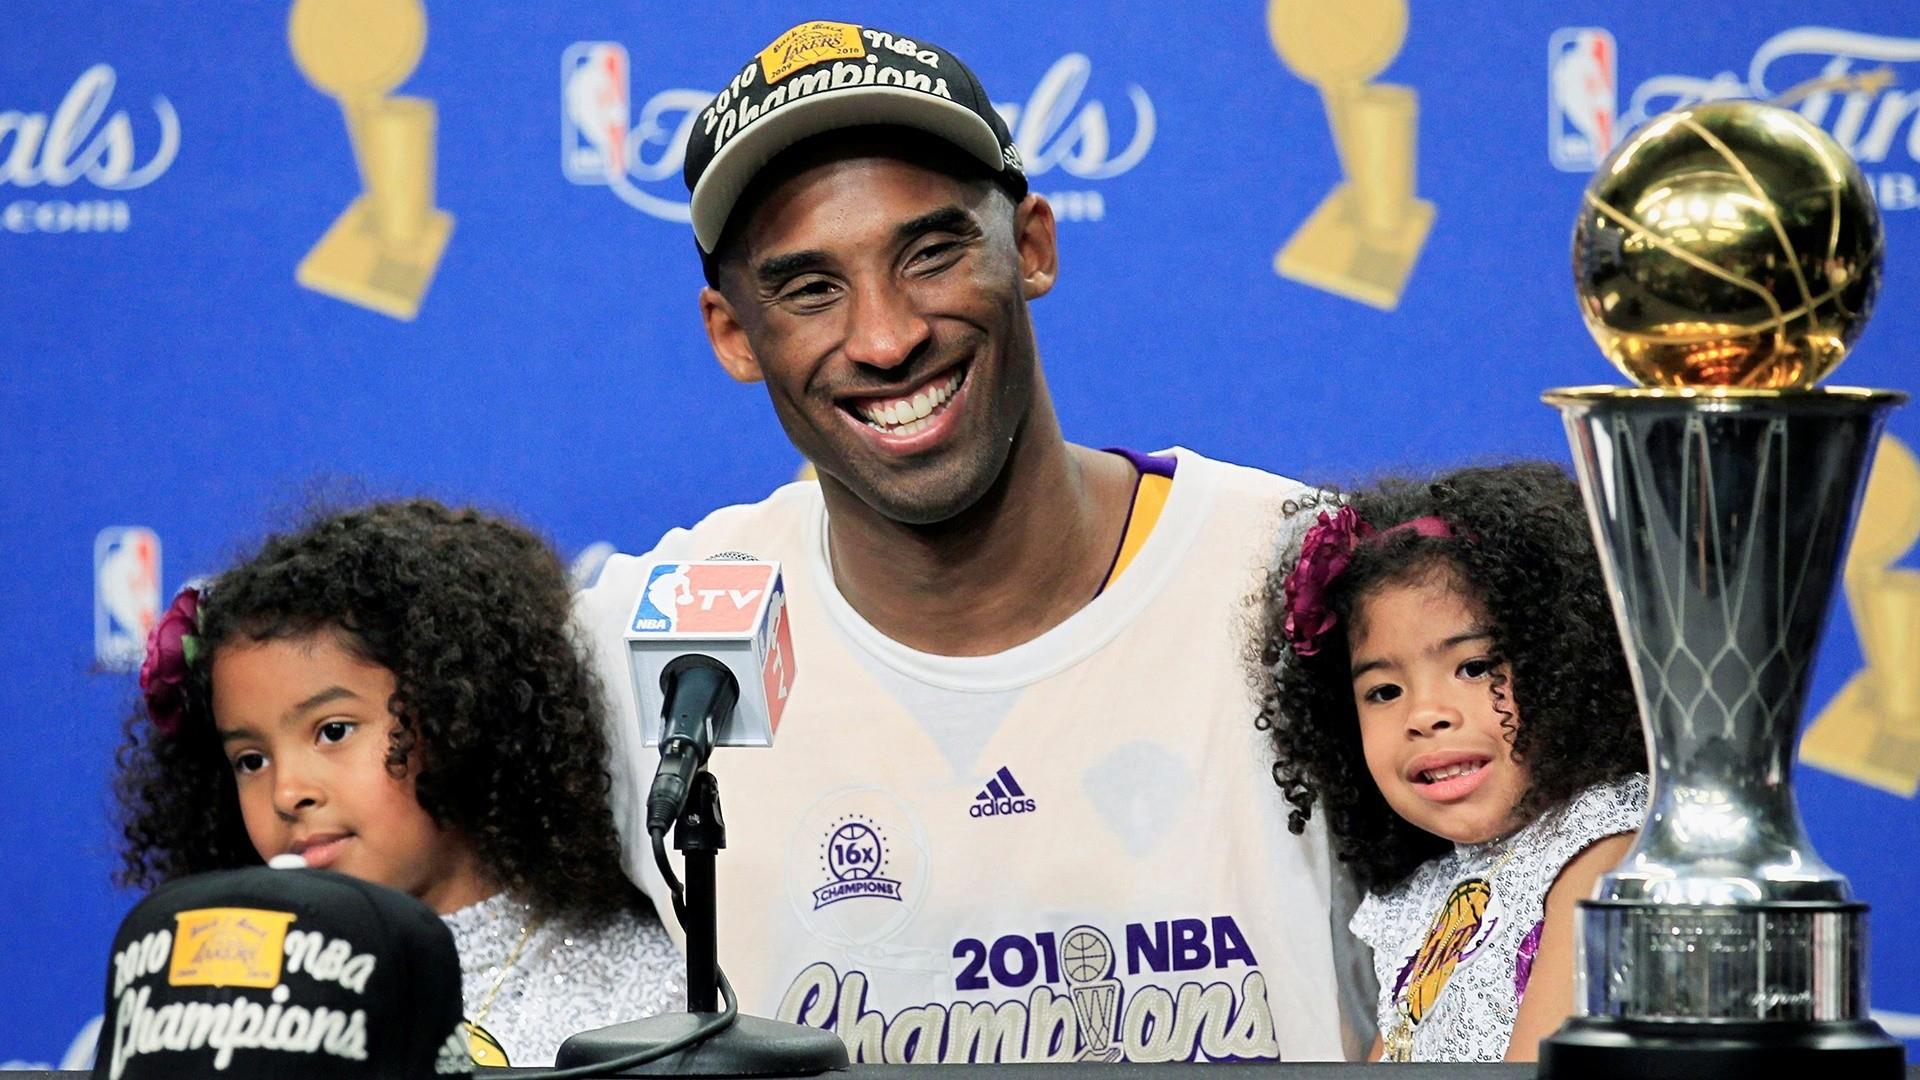 Lakers gift adorable care packages to newborns and families for 'Kobe Day